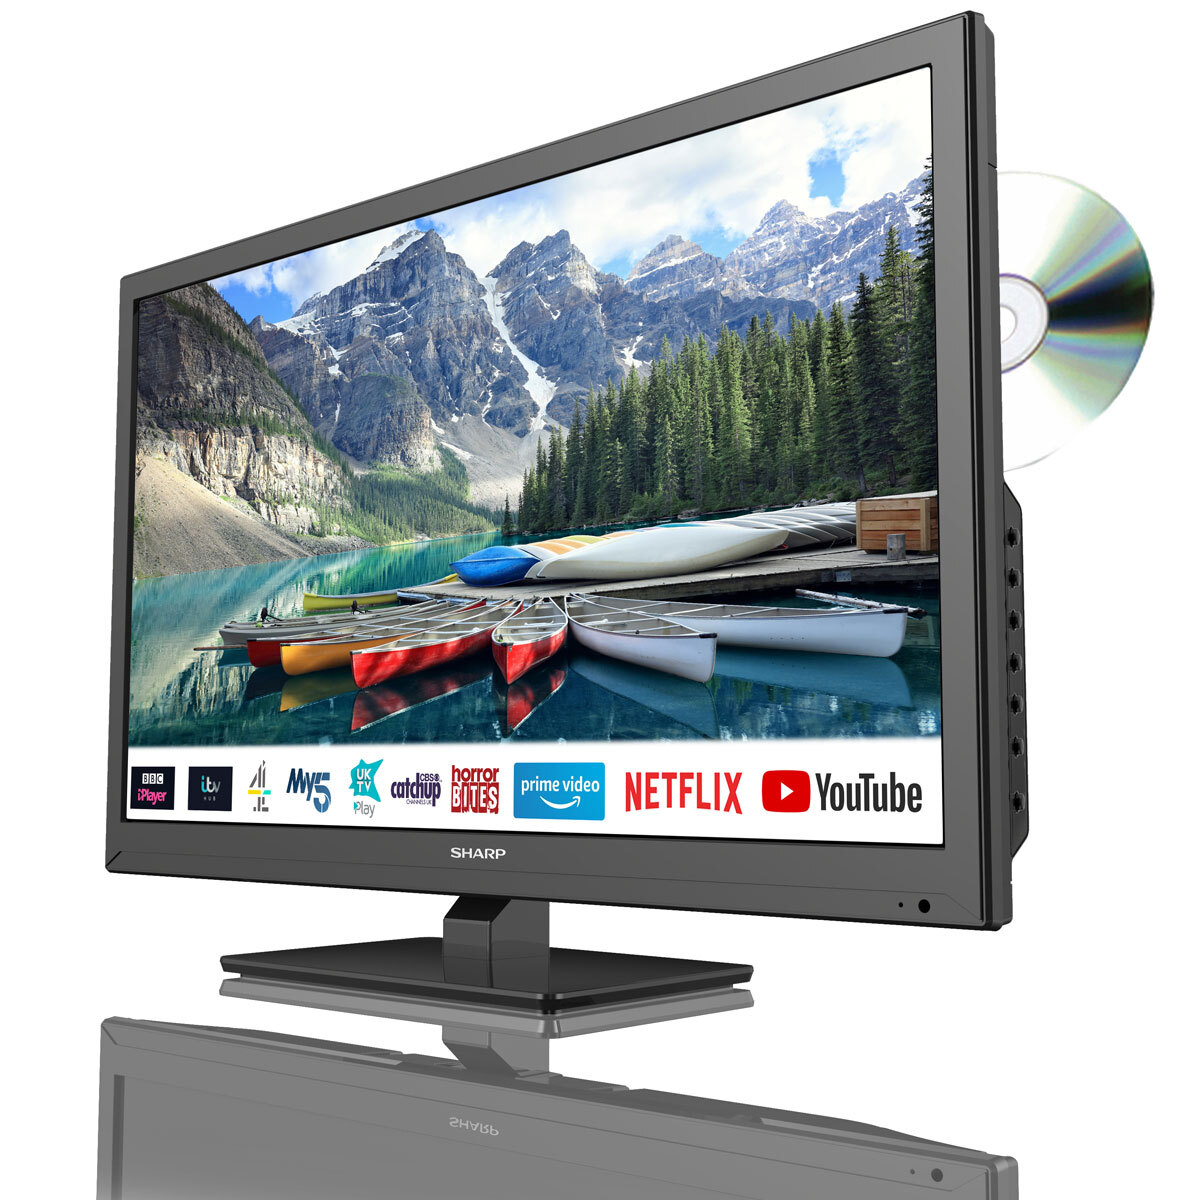 Sharp 1t C24be0kr1fb 24 Inch Hd Ready Smart Tv With Built In Dvd Player 0900